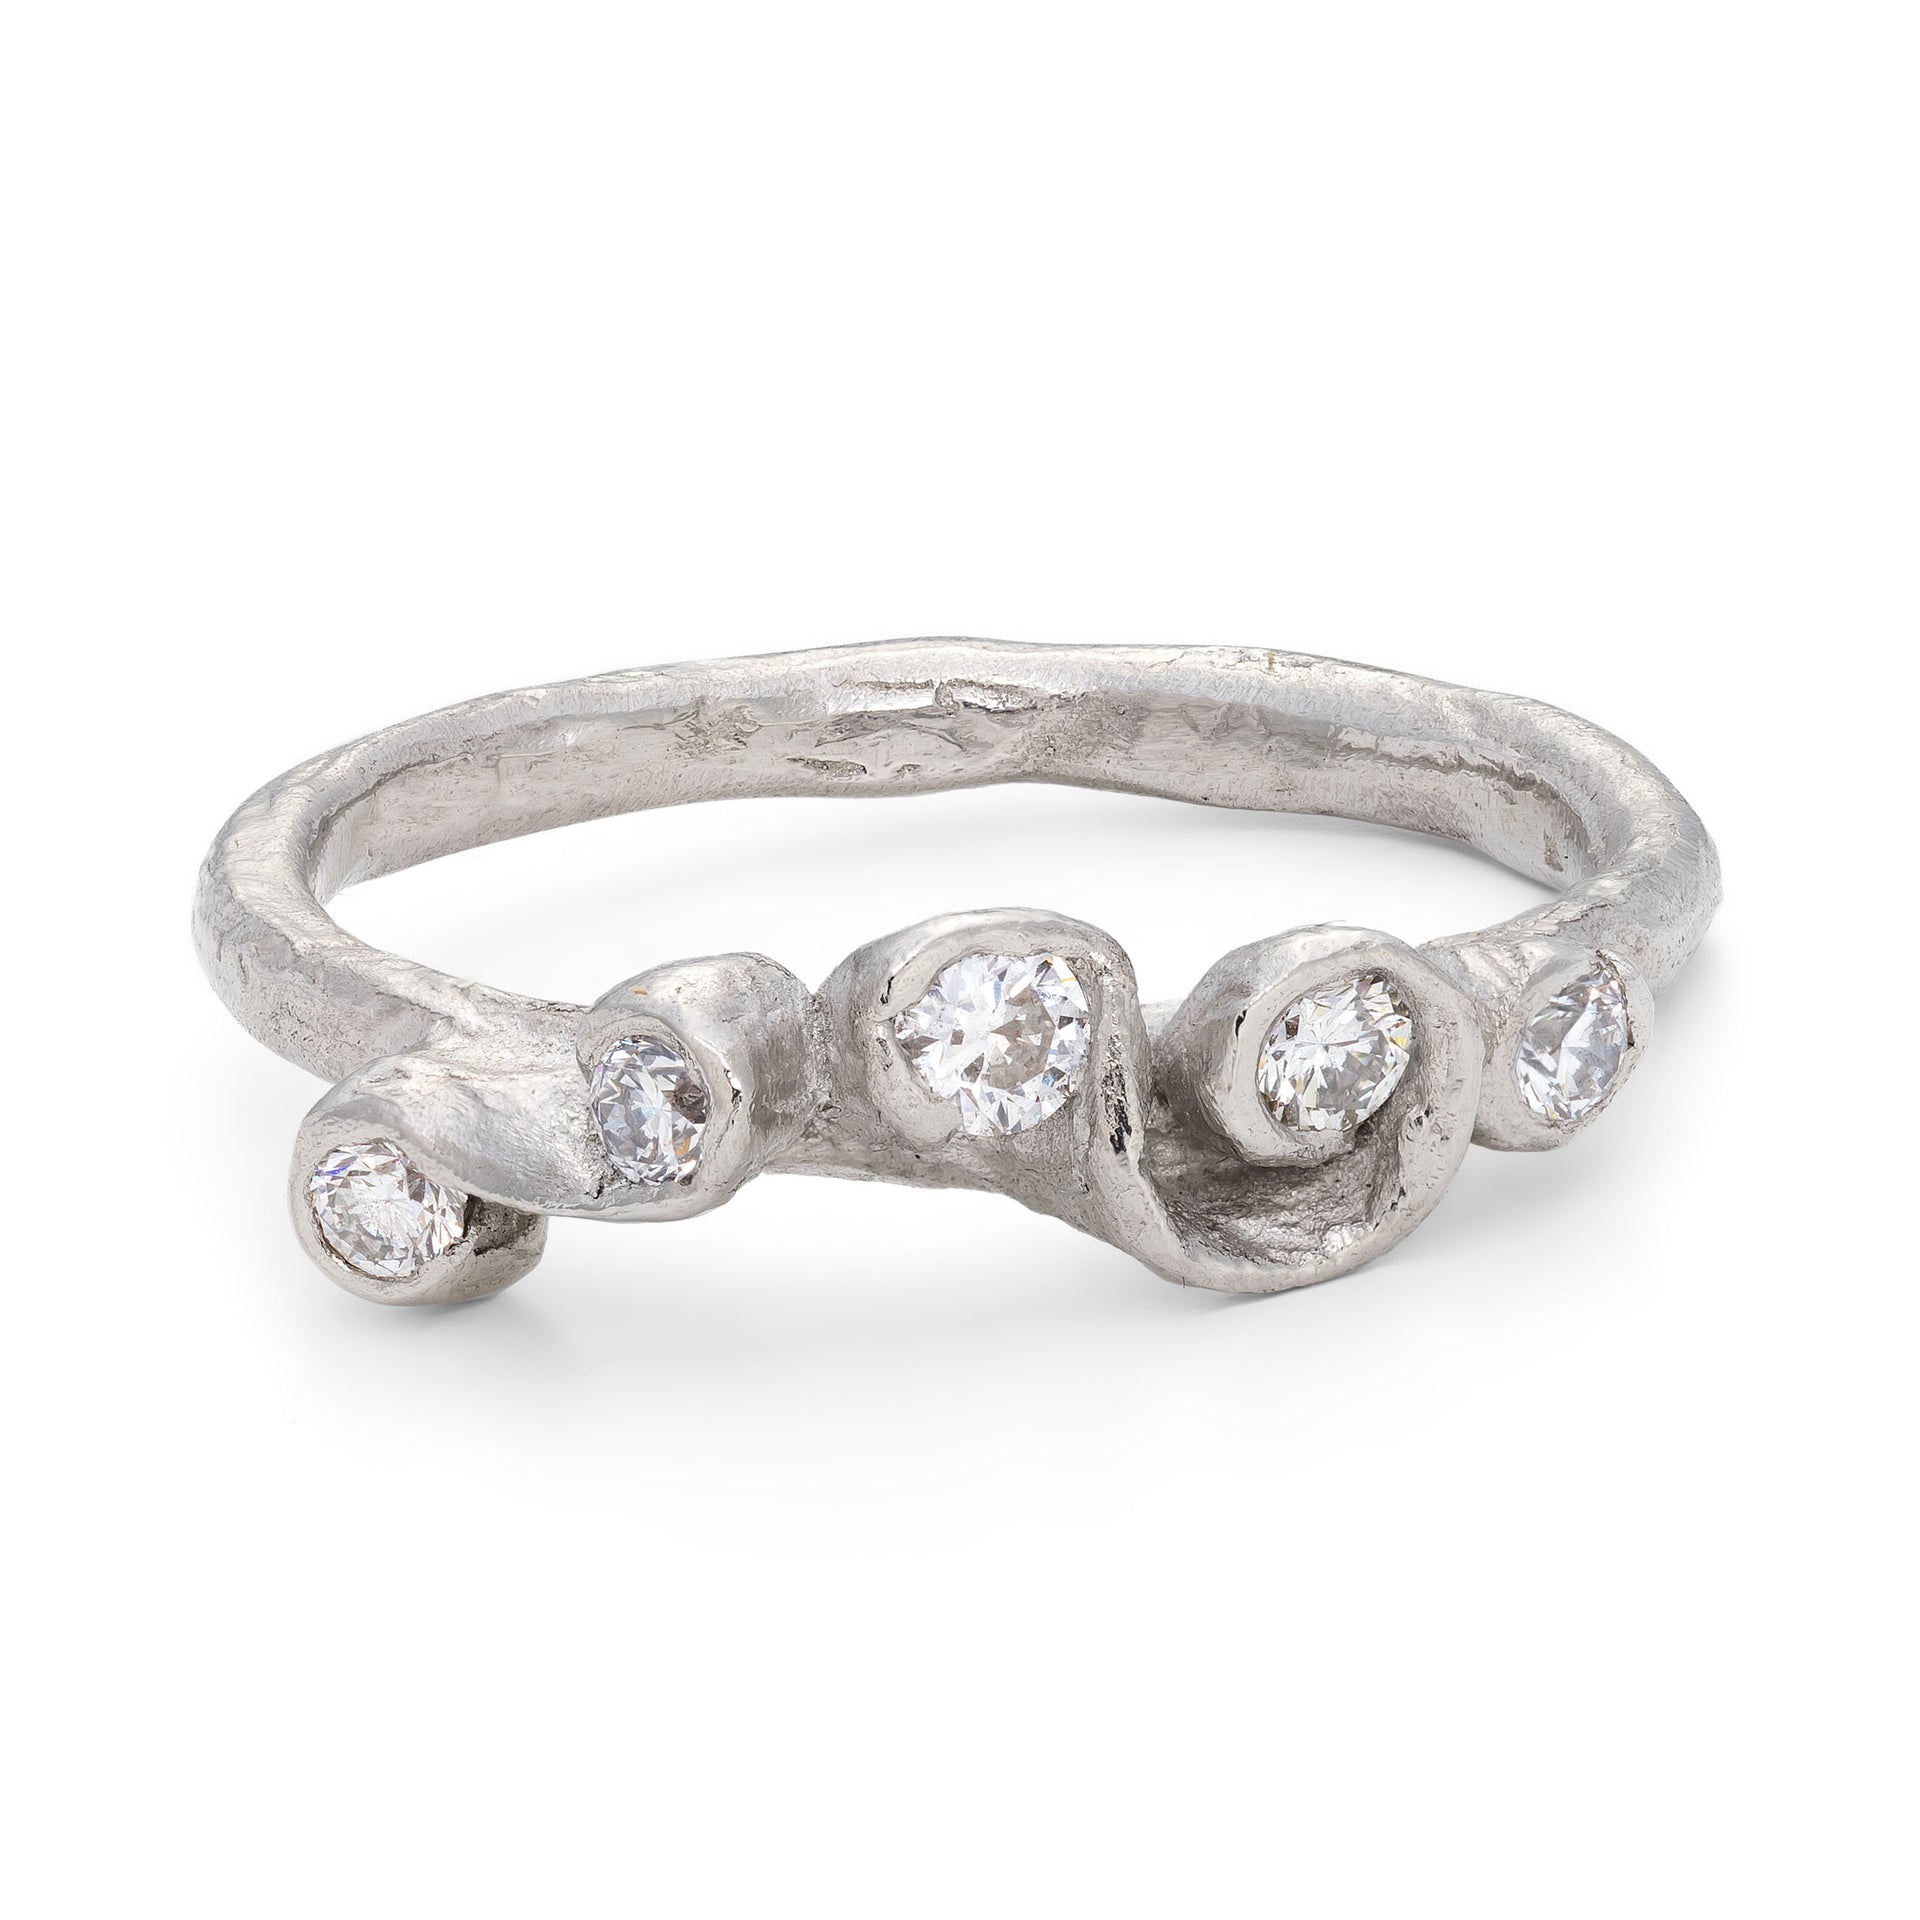 A platinum diamond engagement ring, handcrafted by Emily Nixon in Cornwall.